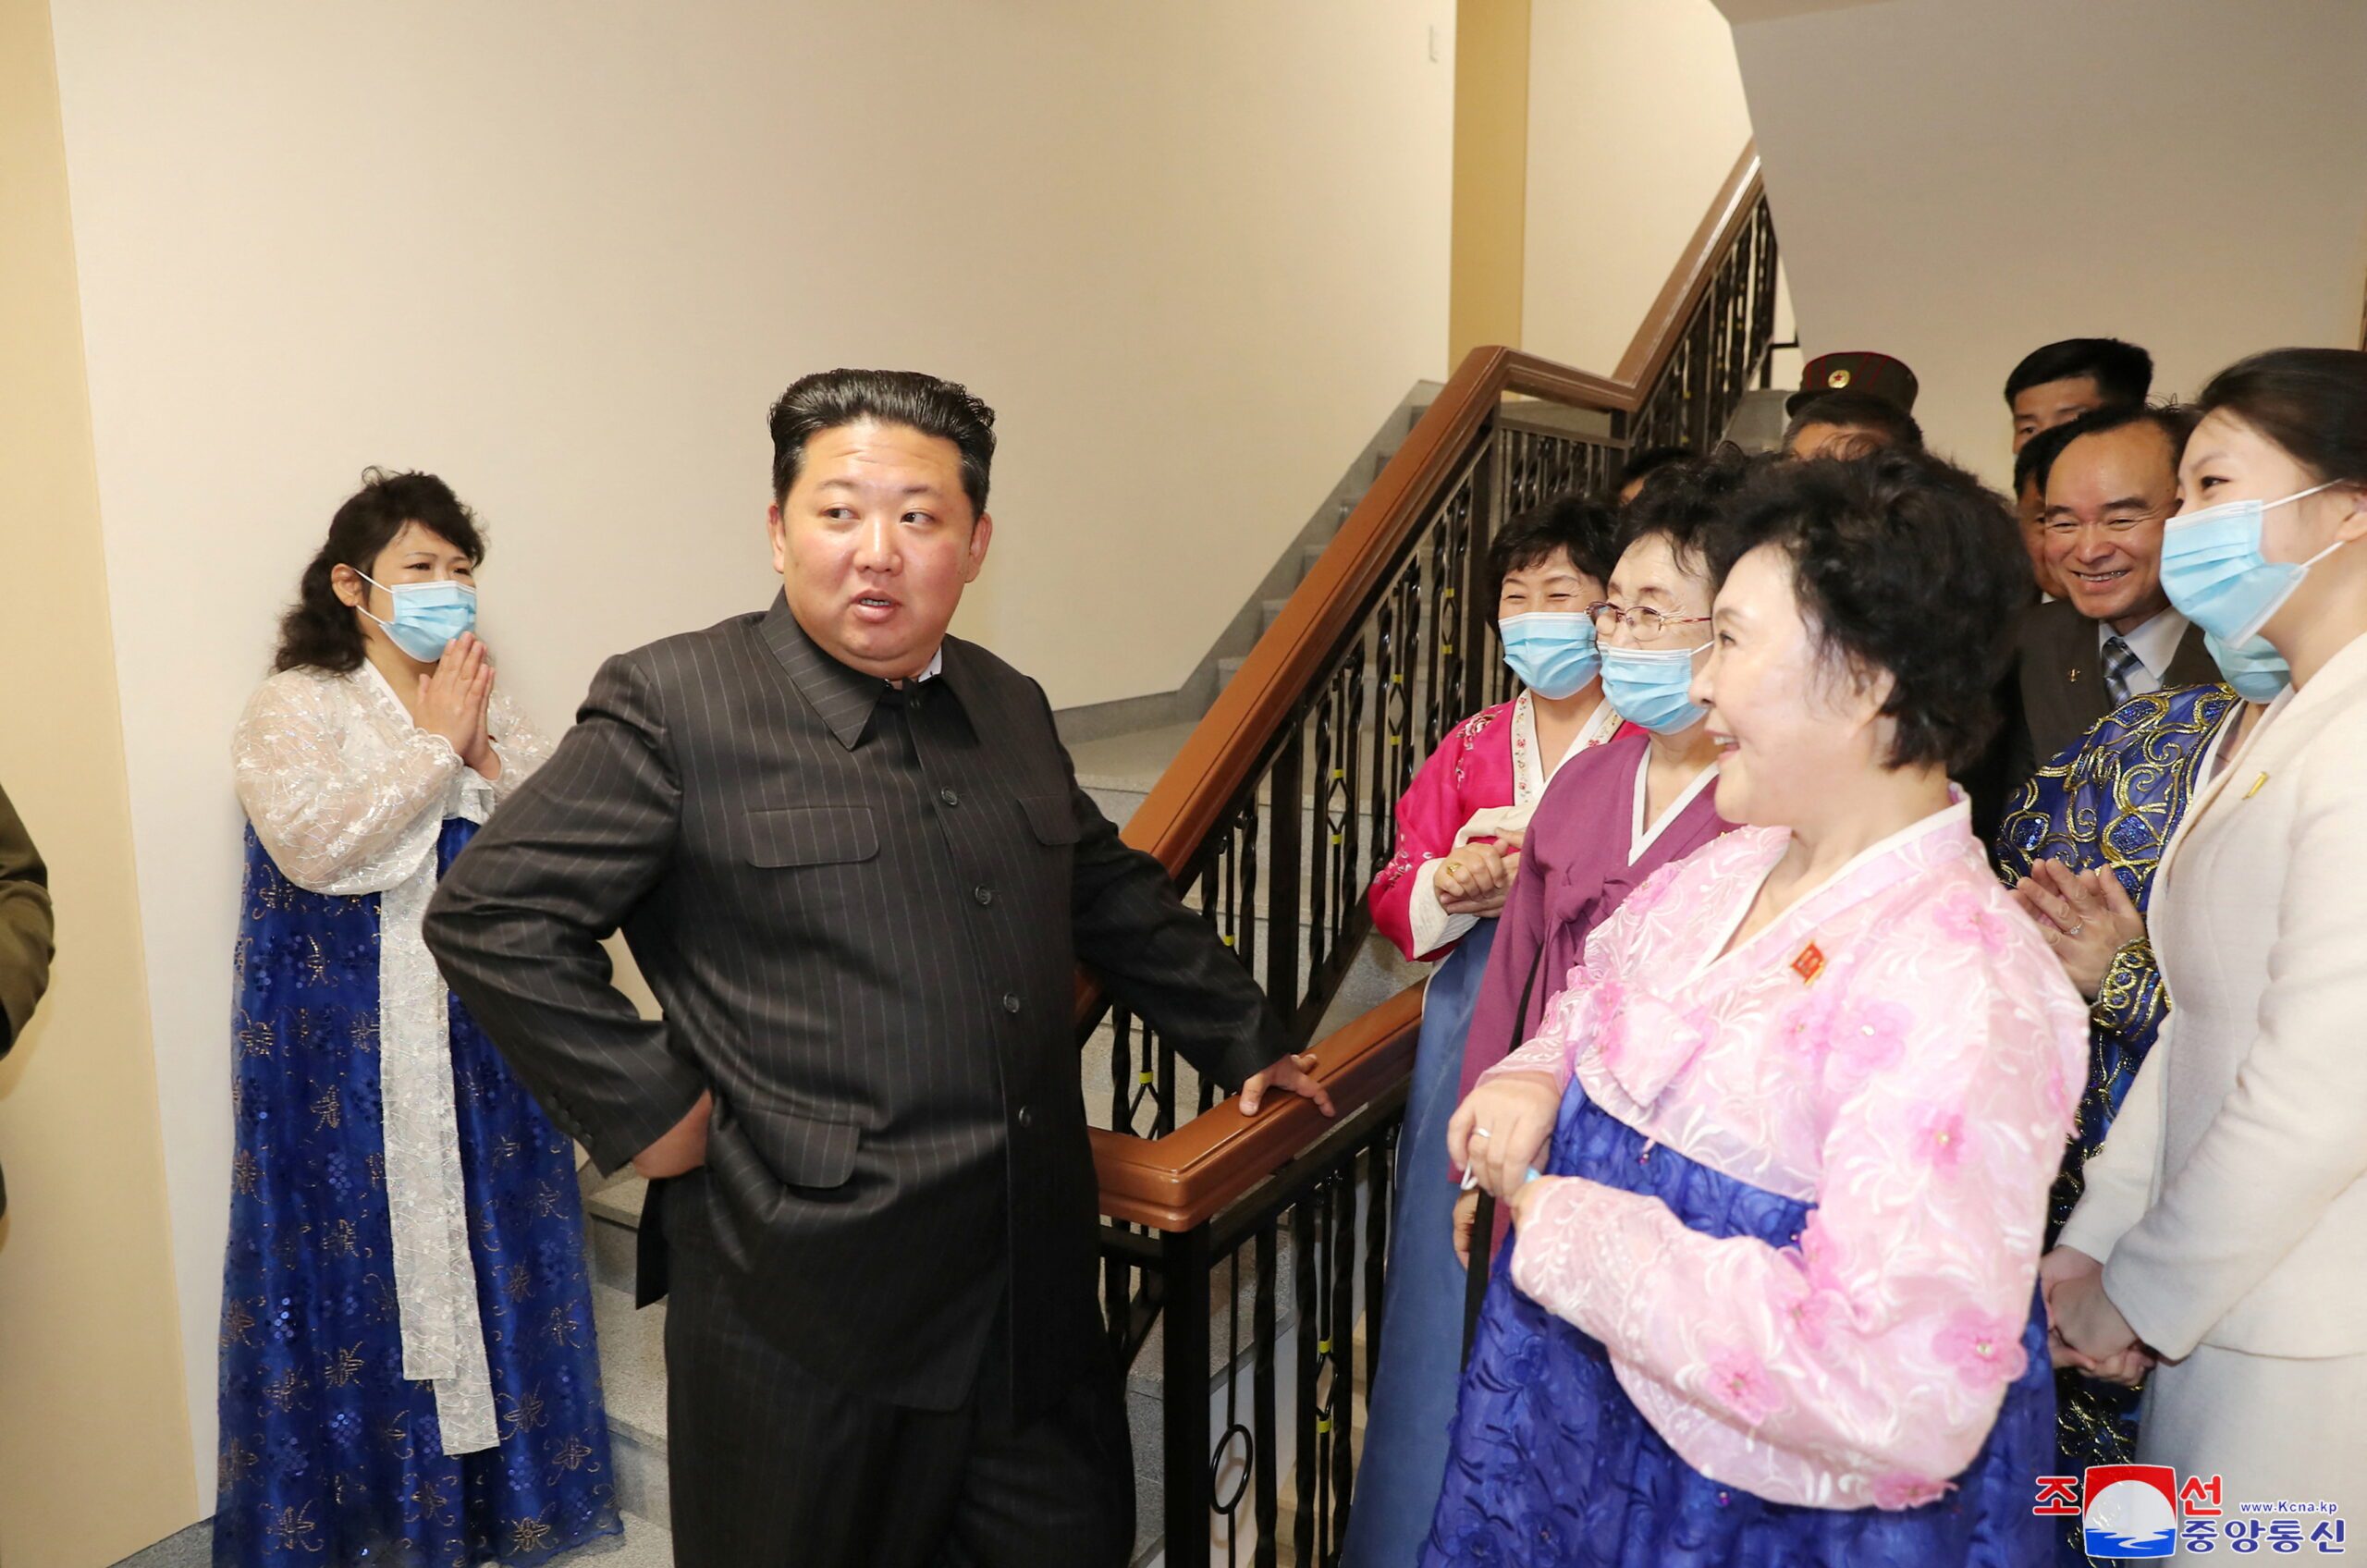 Penthouses in North Korea are mainly for the unfortunate few